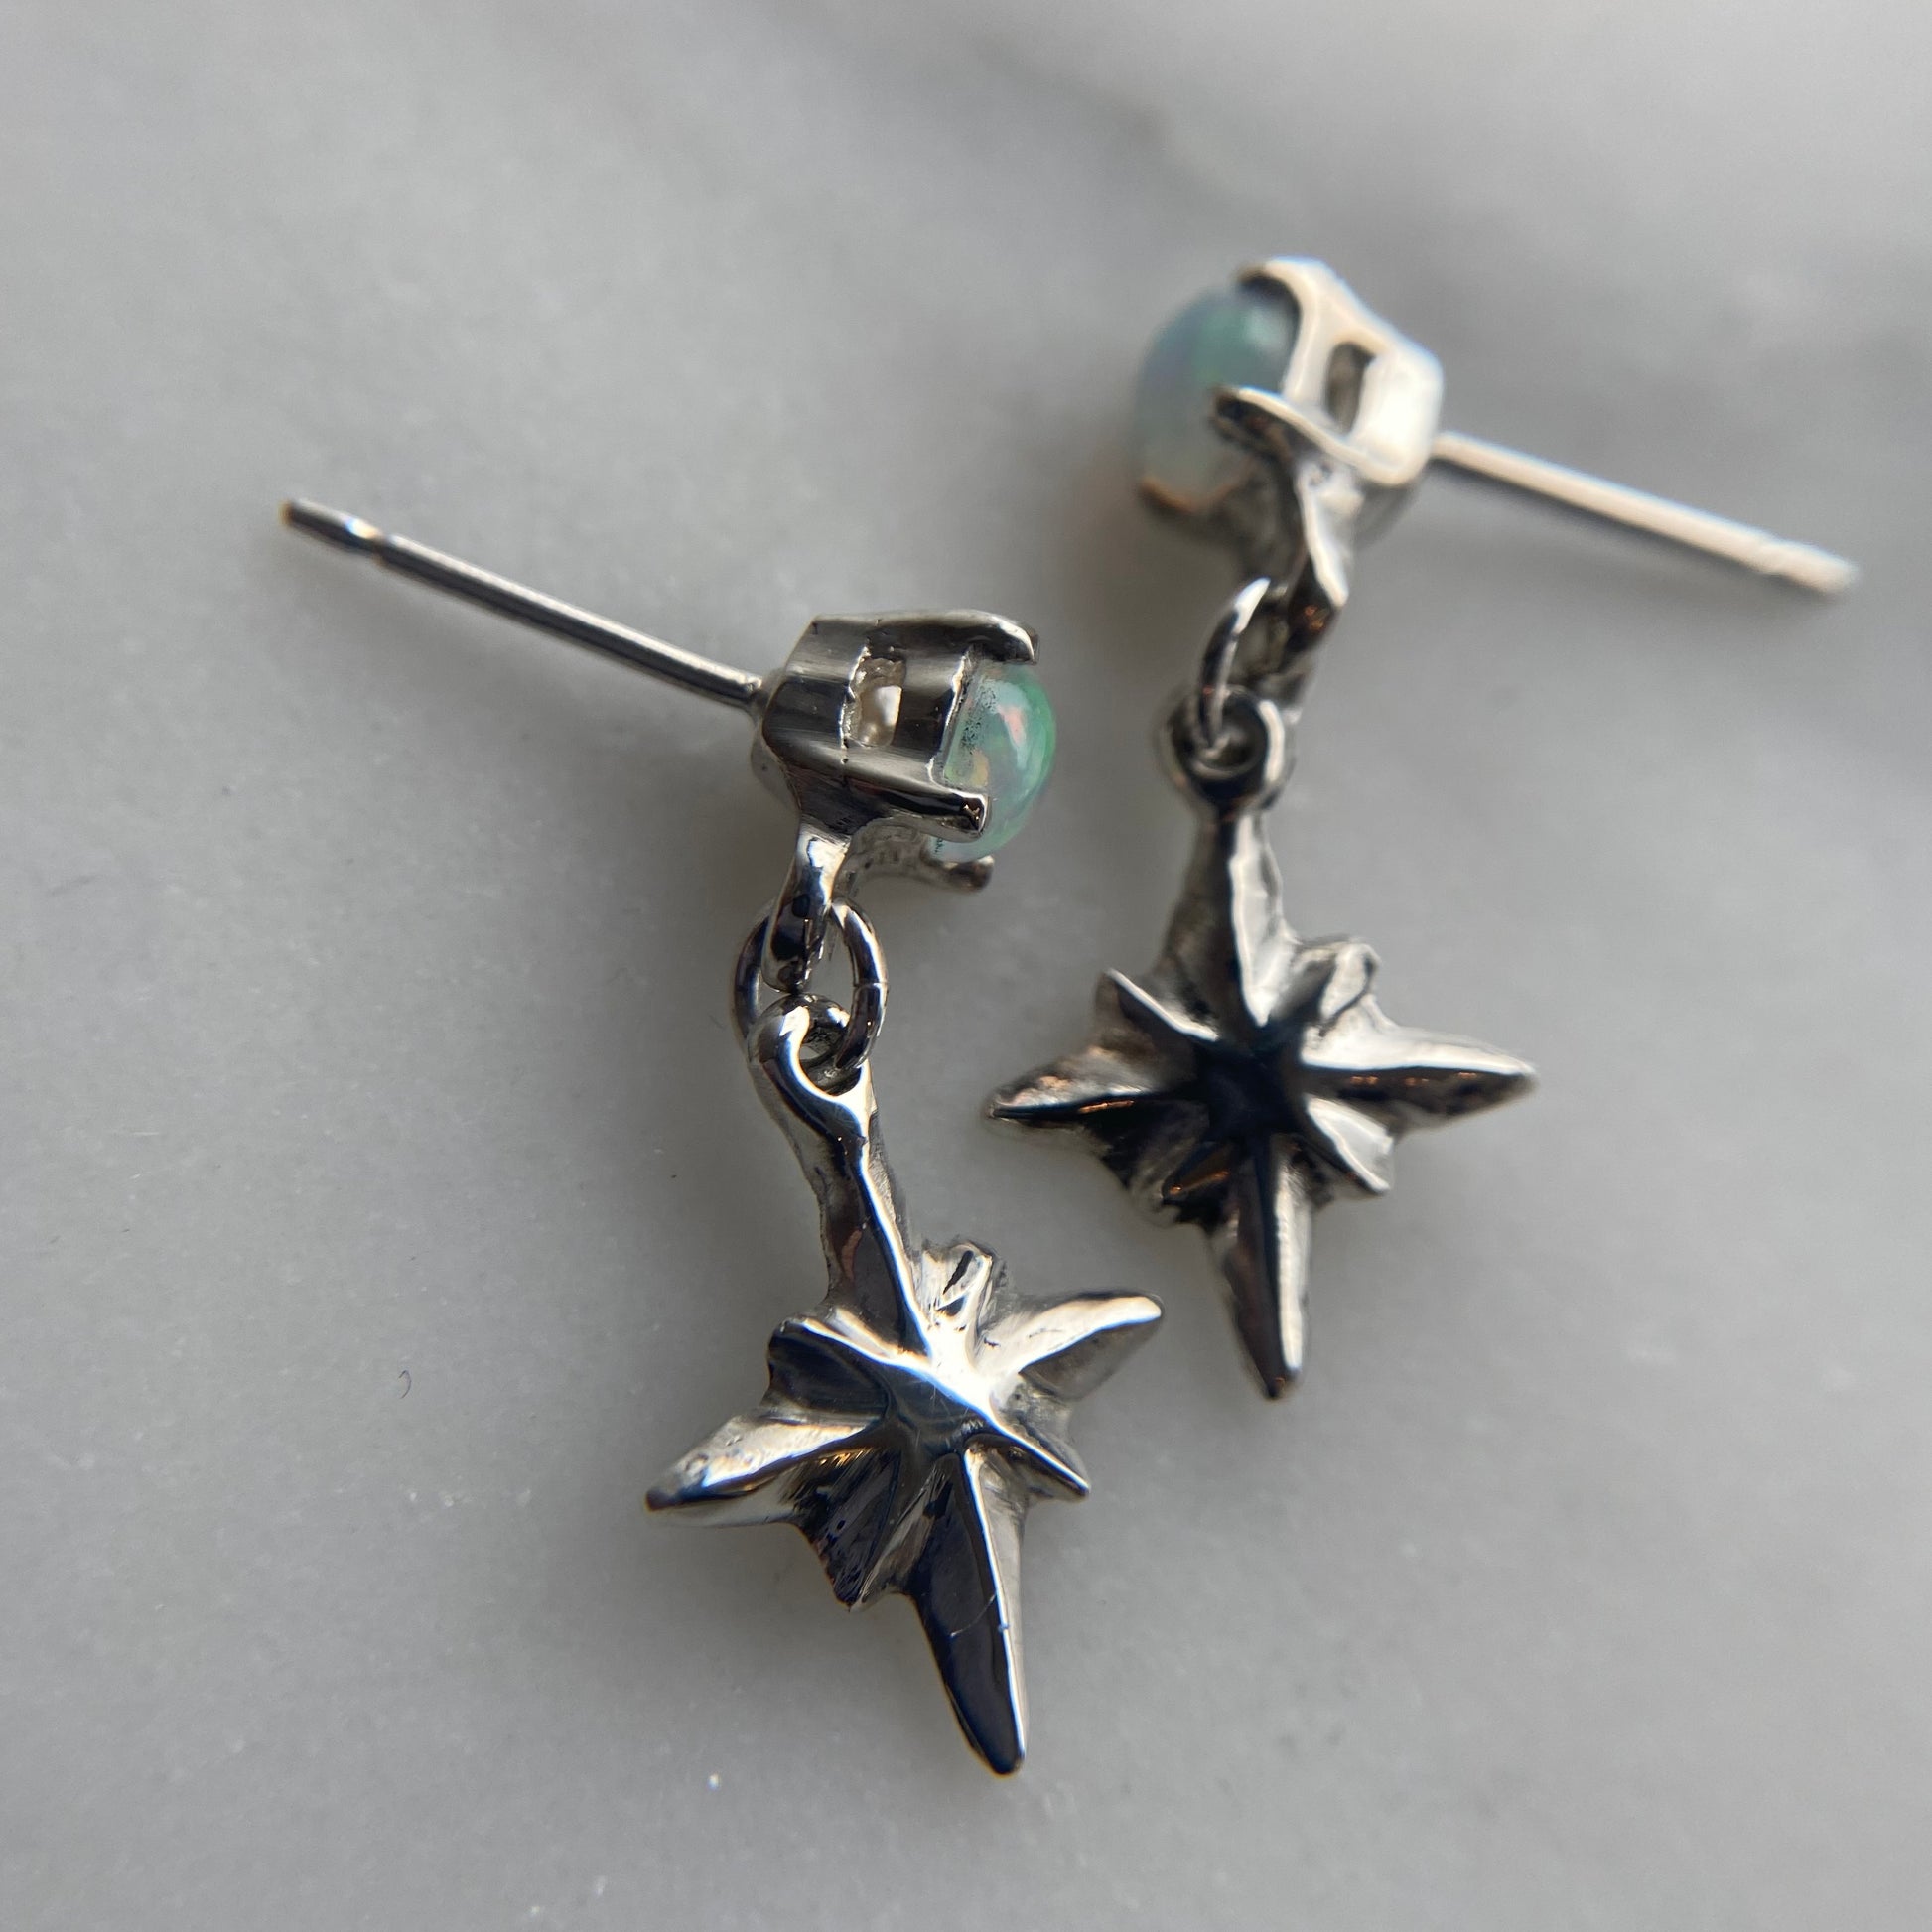 Tiny dangly star earrings set with 4mm clear cubic zirconia, in sterling silver. Made by Iron Oxide Designs, close up showing post back earrings.